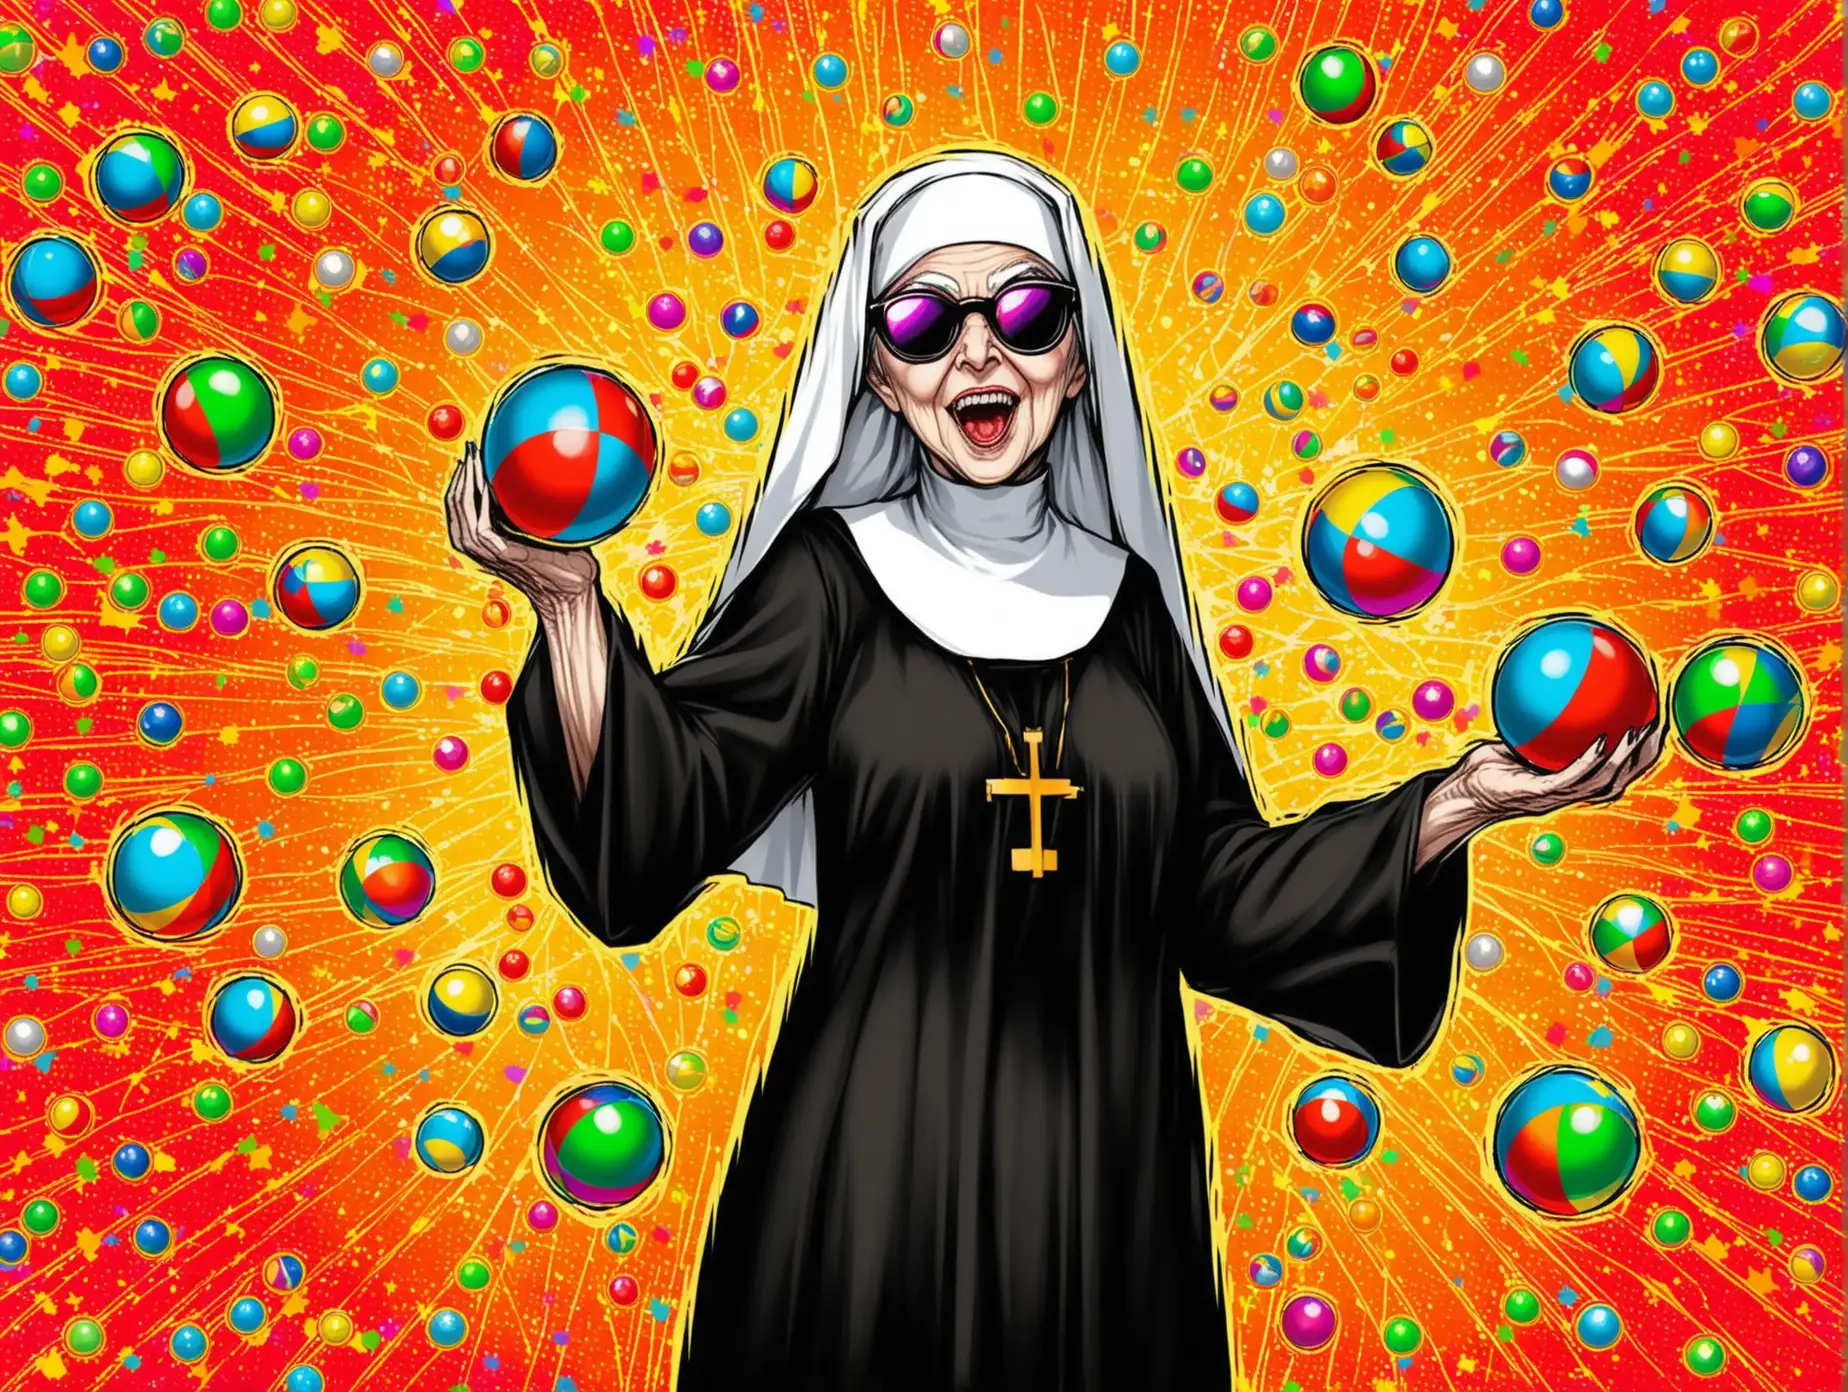 Eccentric Nun Juggling Balls in Vibrant Jackson Pollock and KlimtInspired Psychedelic Style